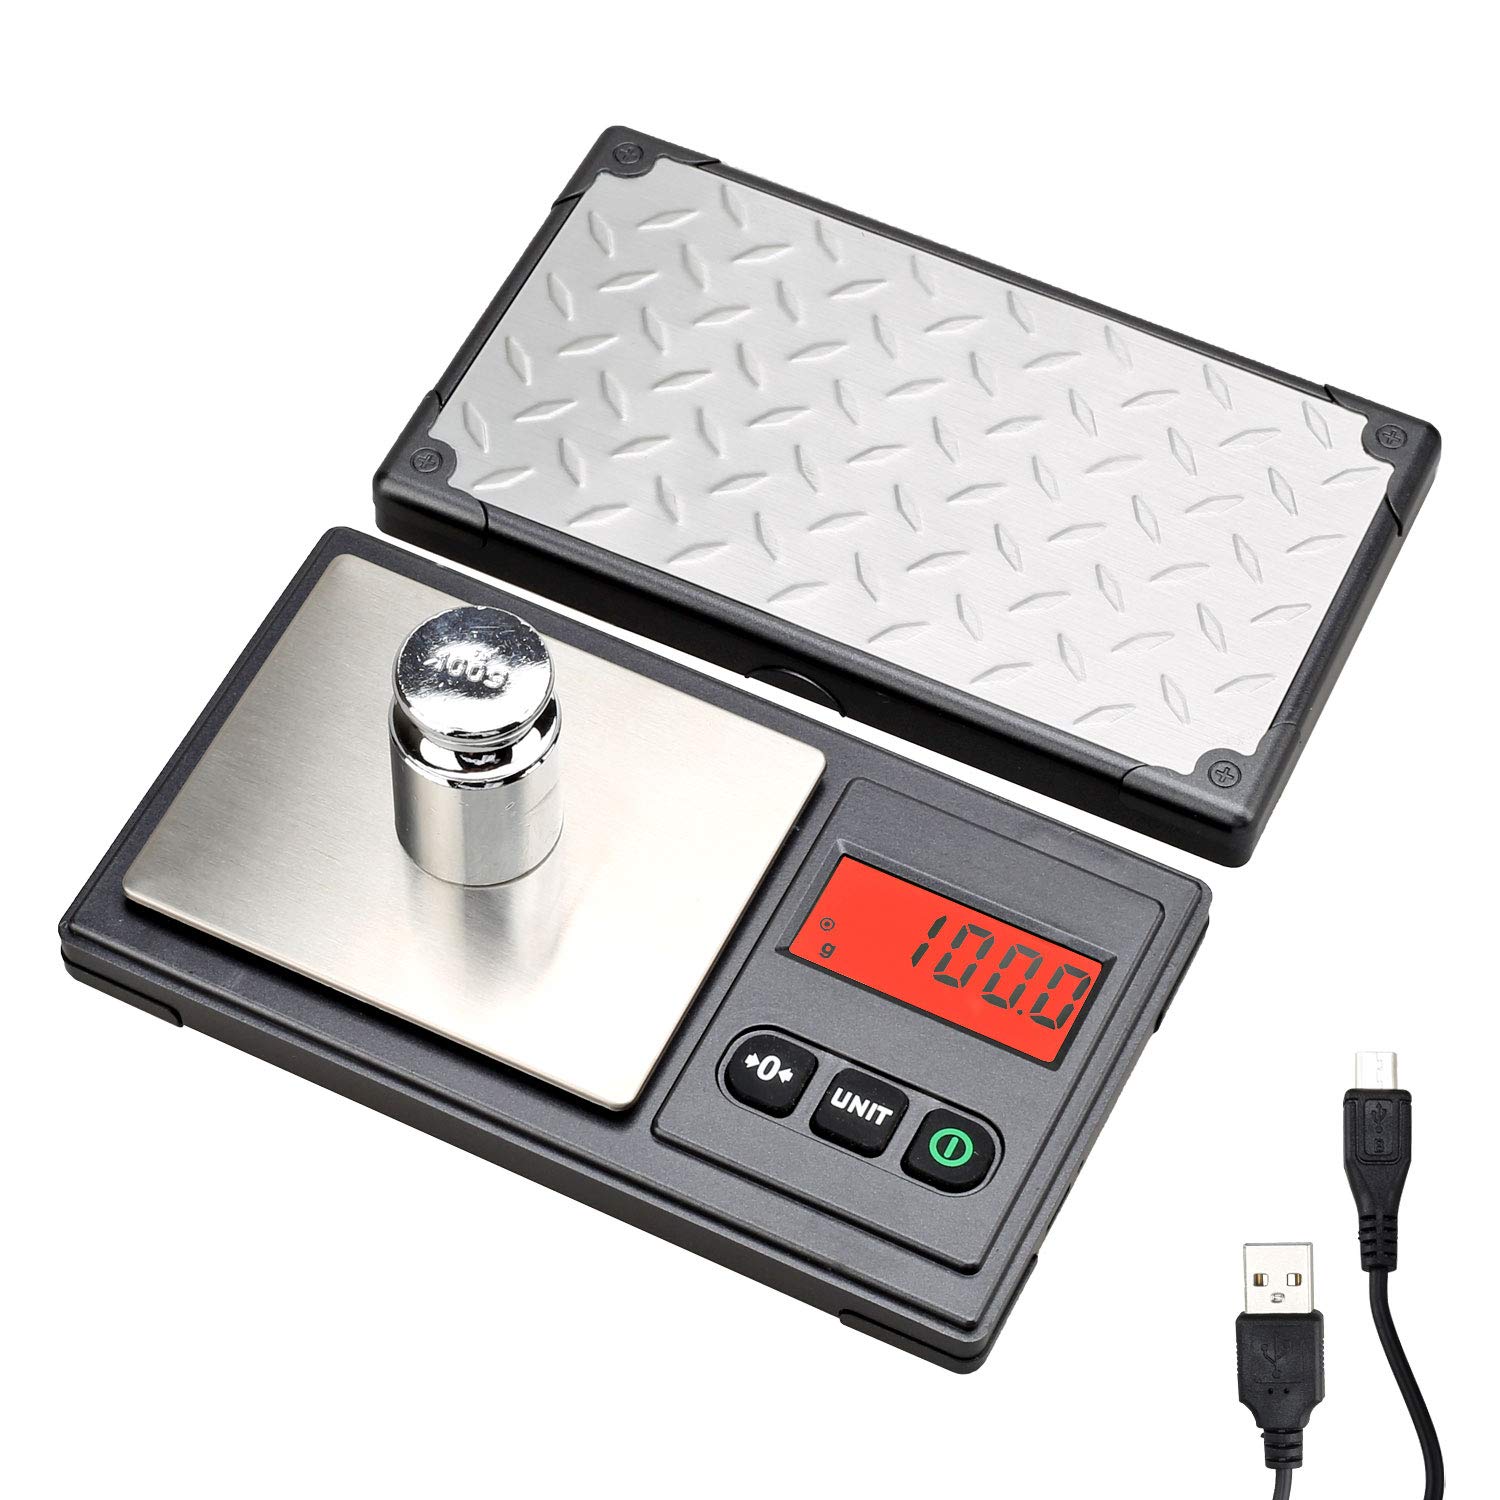 Book Cover Gram Scale 220g / 0.01g, Digital Pocket Scale with 100g Calibration Weight,Mini Jewelry Scale, Kitchen Scale,6 Units Conversion, Tare & LCD Display, Auto Off, Rechargeable